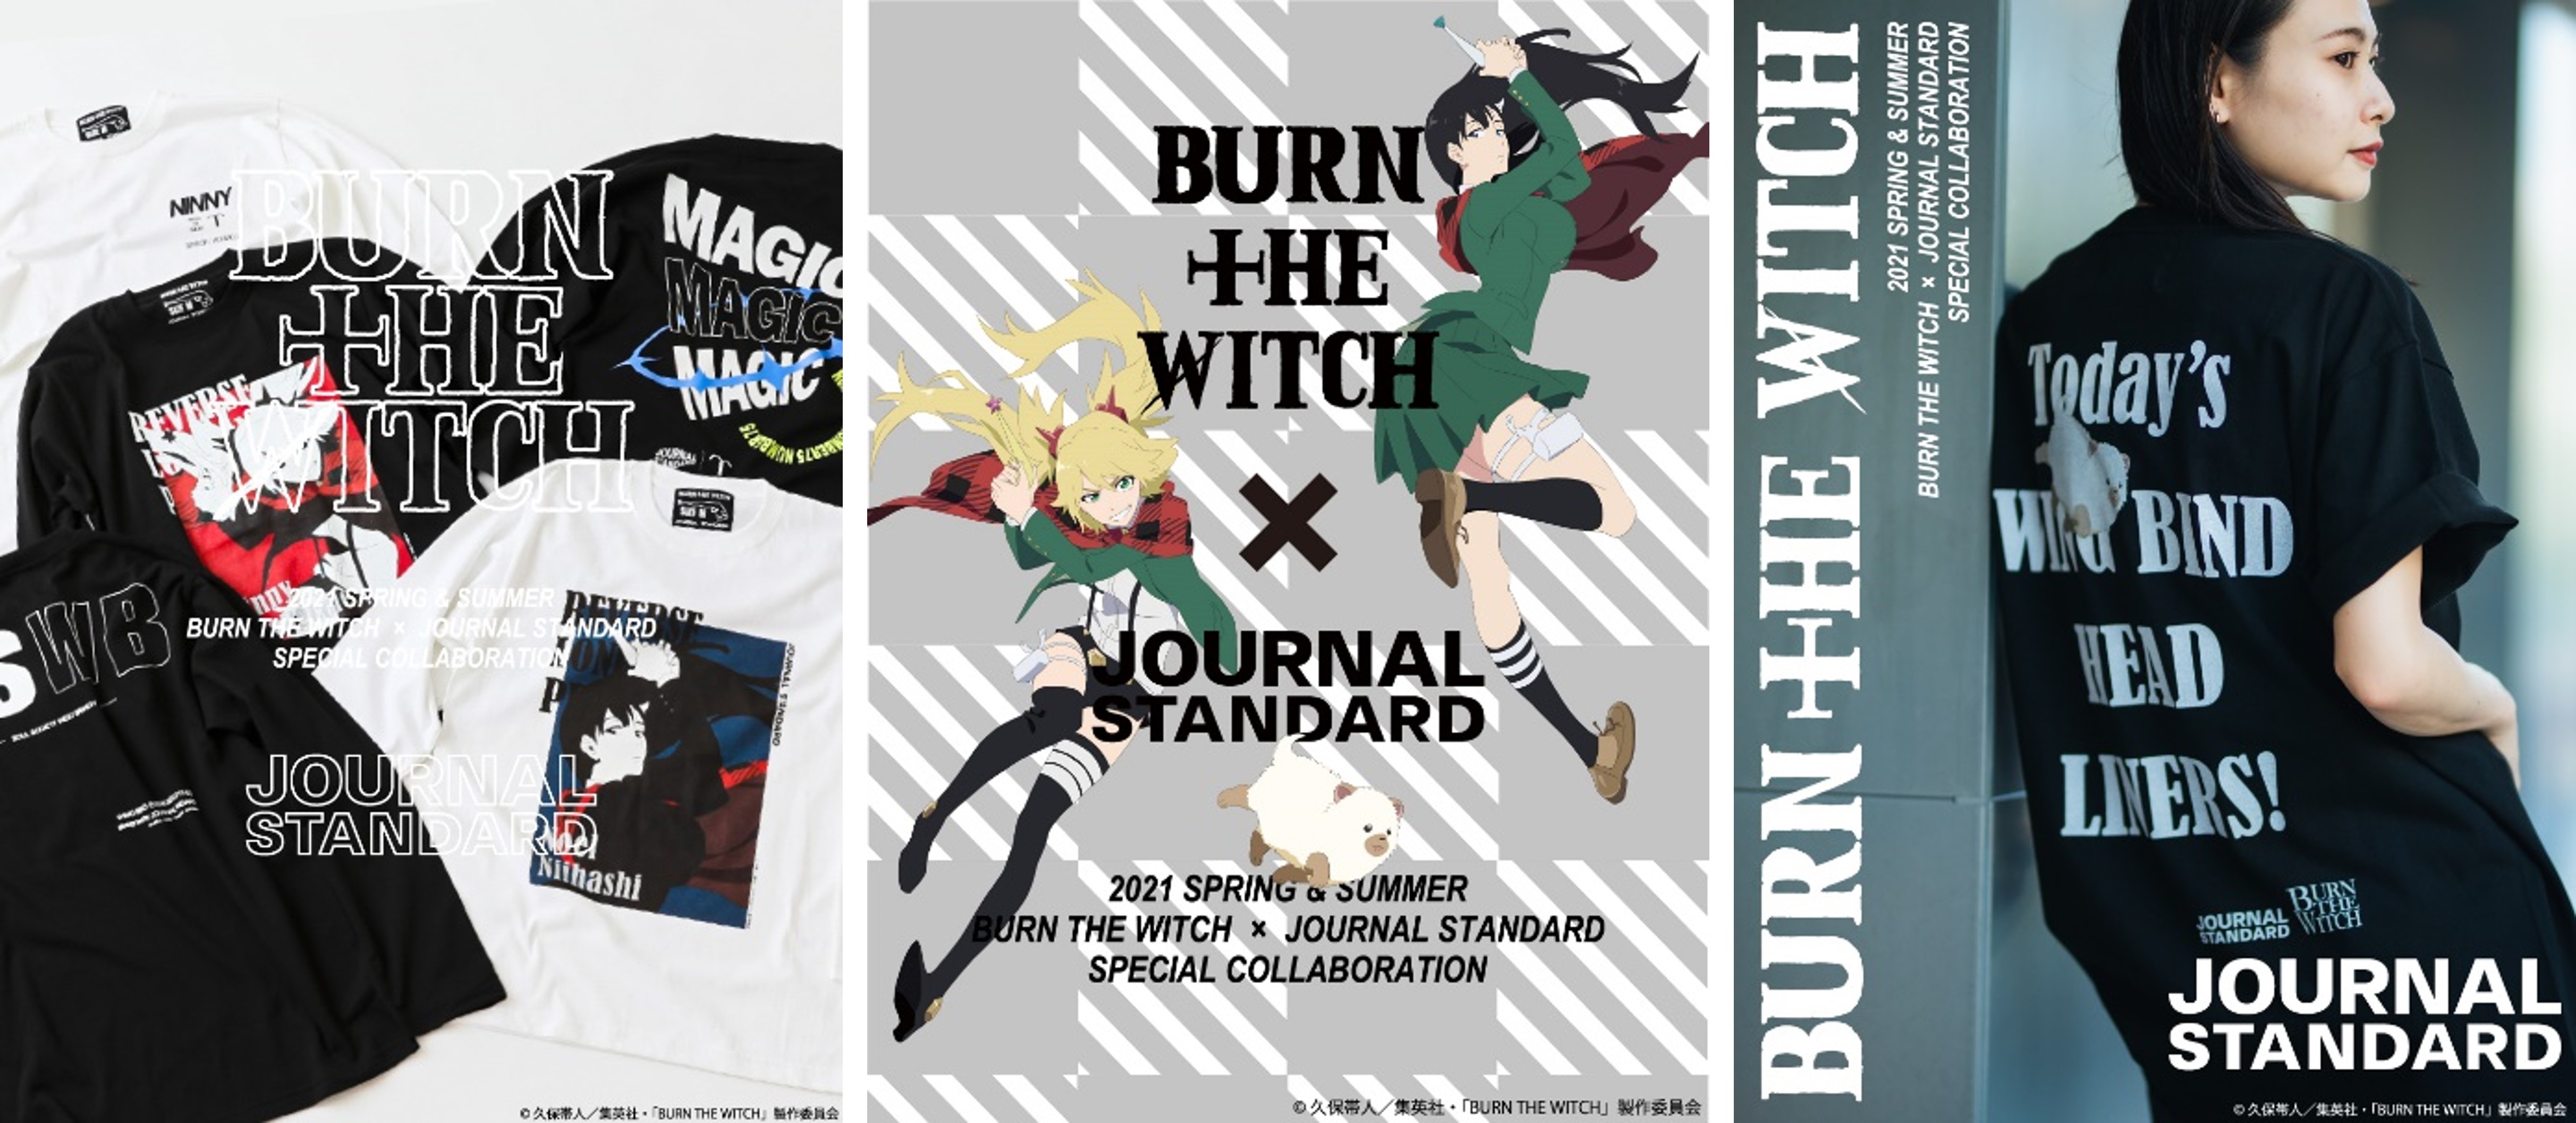 Burn The Witch Journal Standard Special Collaboration 7月2日 金 ベイクルーズ ストア受注受付開始 株式会社ベイクルーズのプレスリリース